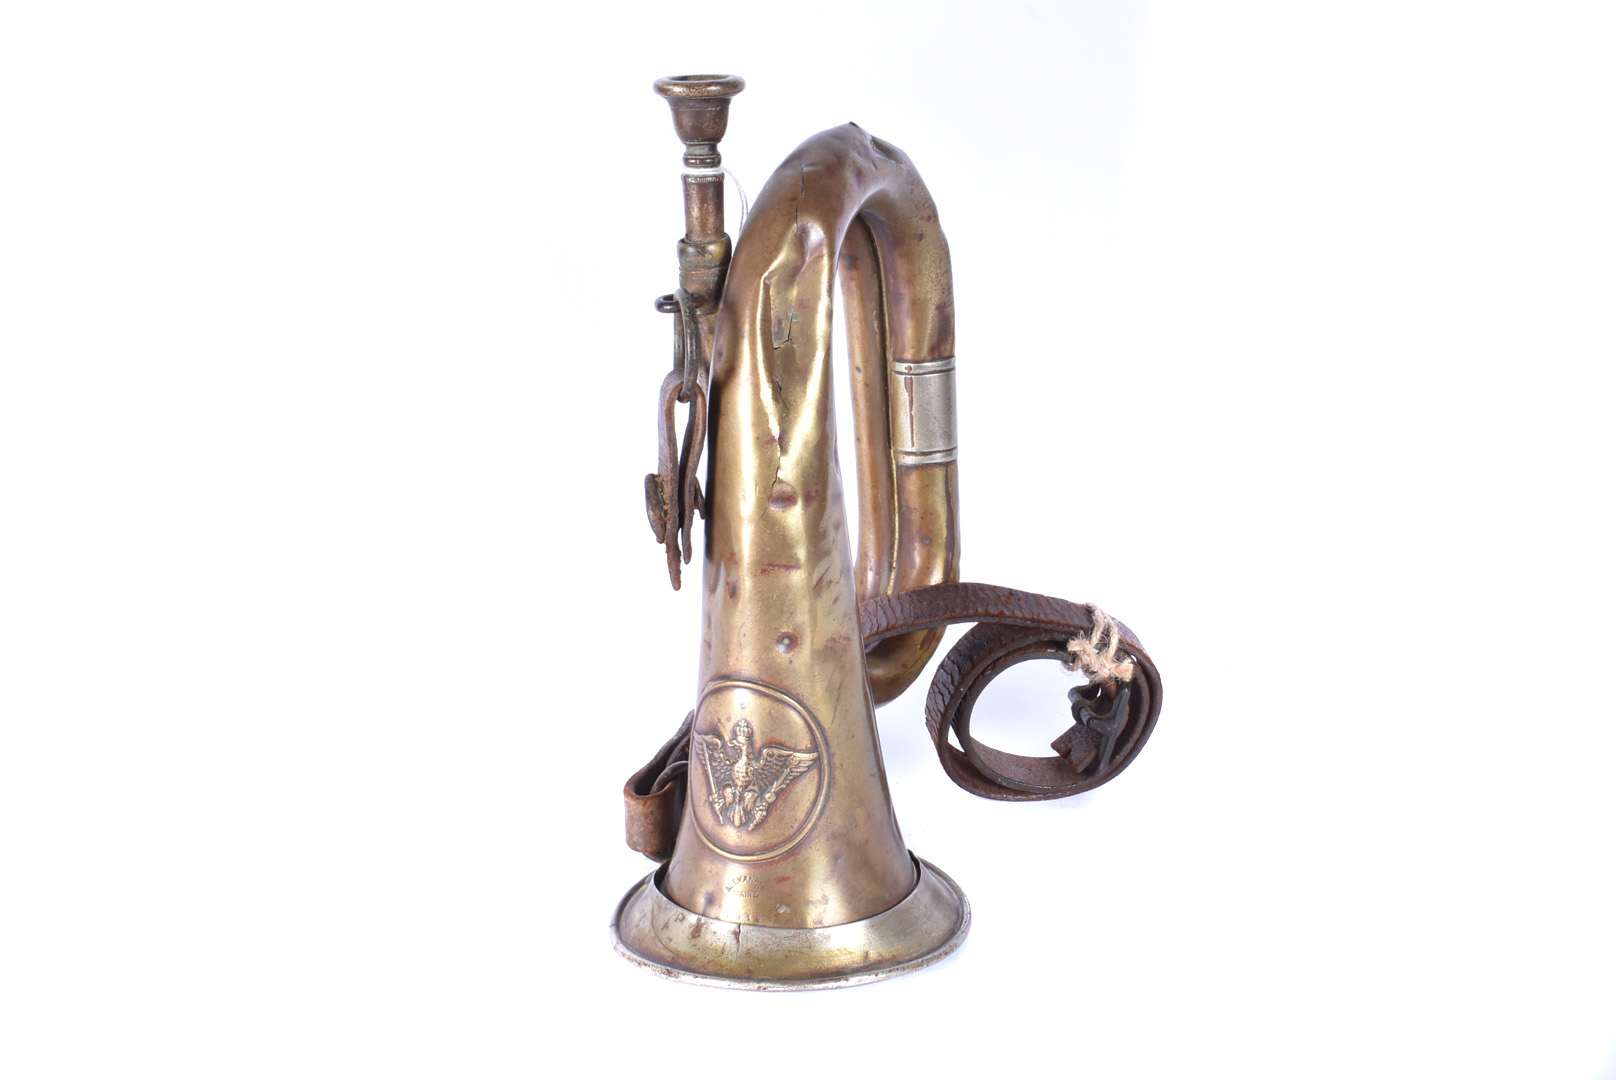 A WWI Prussian military-issue mixed-metal bugle, by Alexander Mainz, dated 1914, in combat